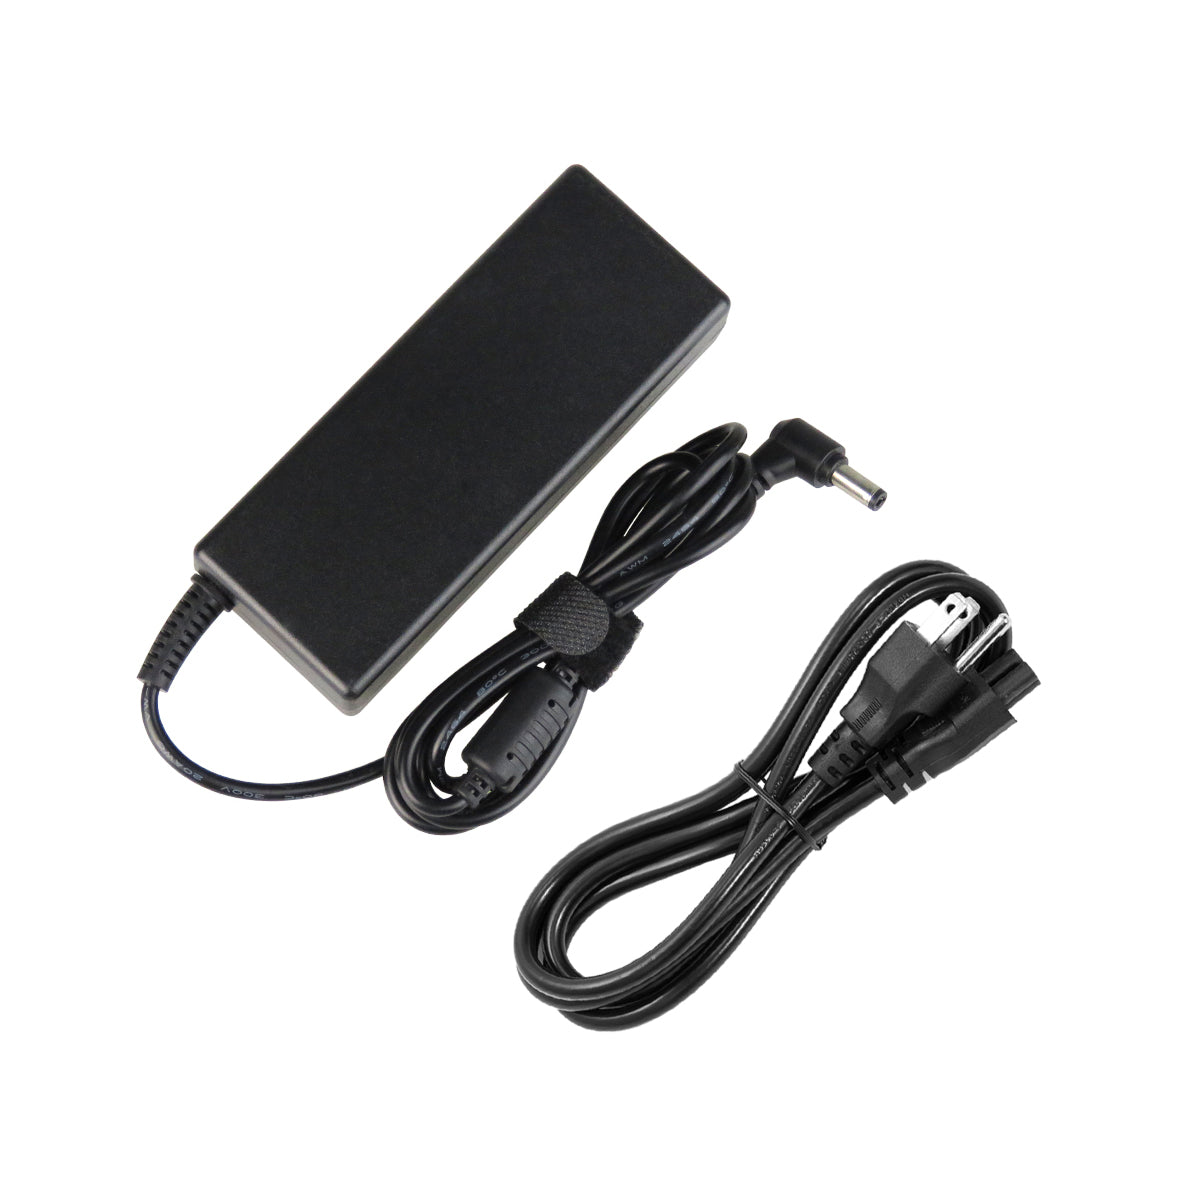 AC Adapter Charger for ASUS N43F Notebook.